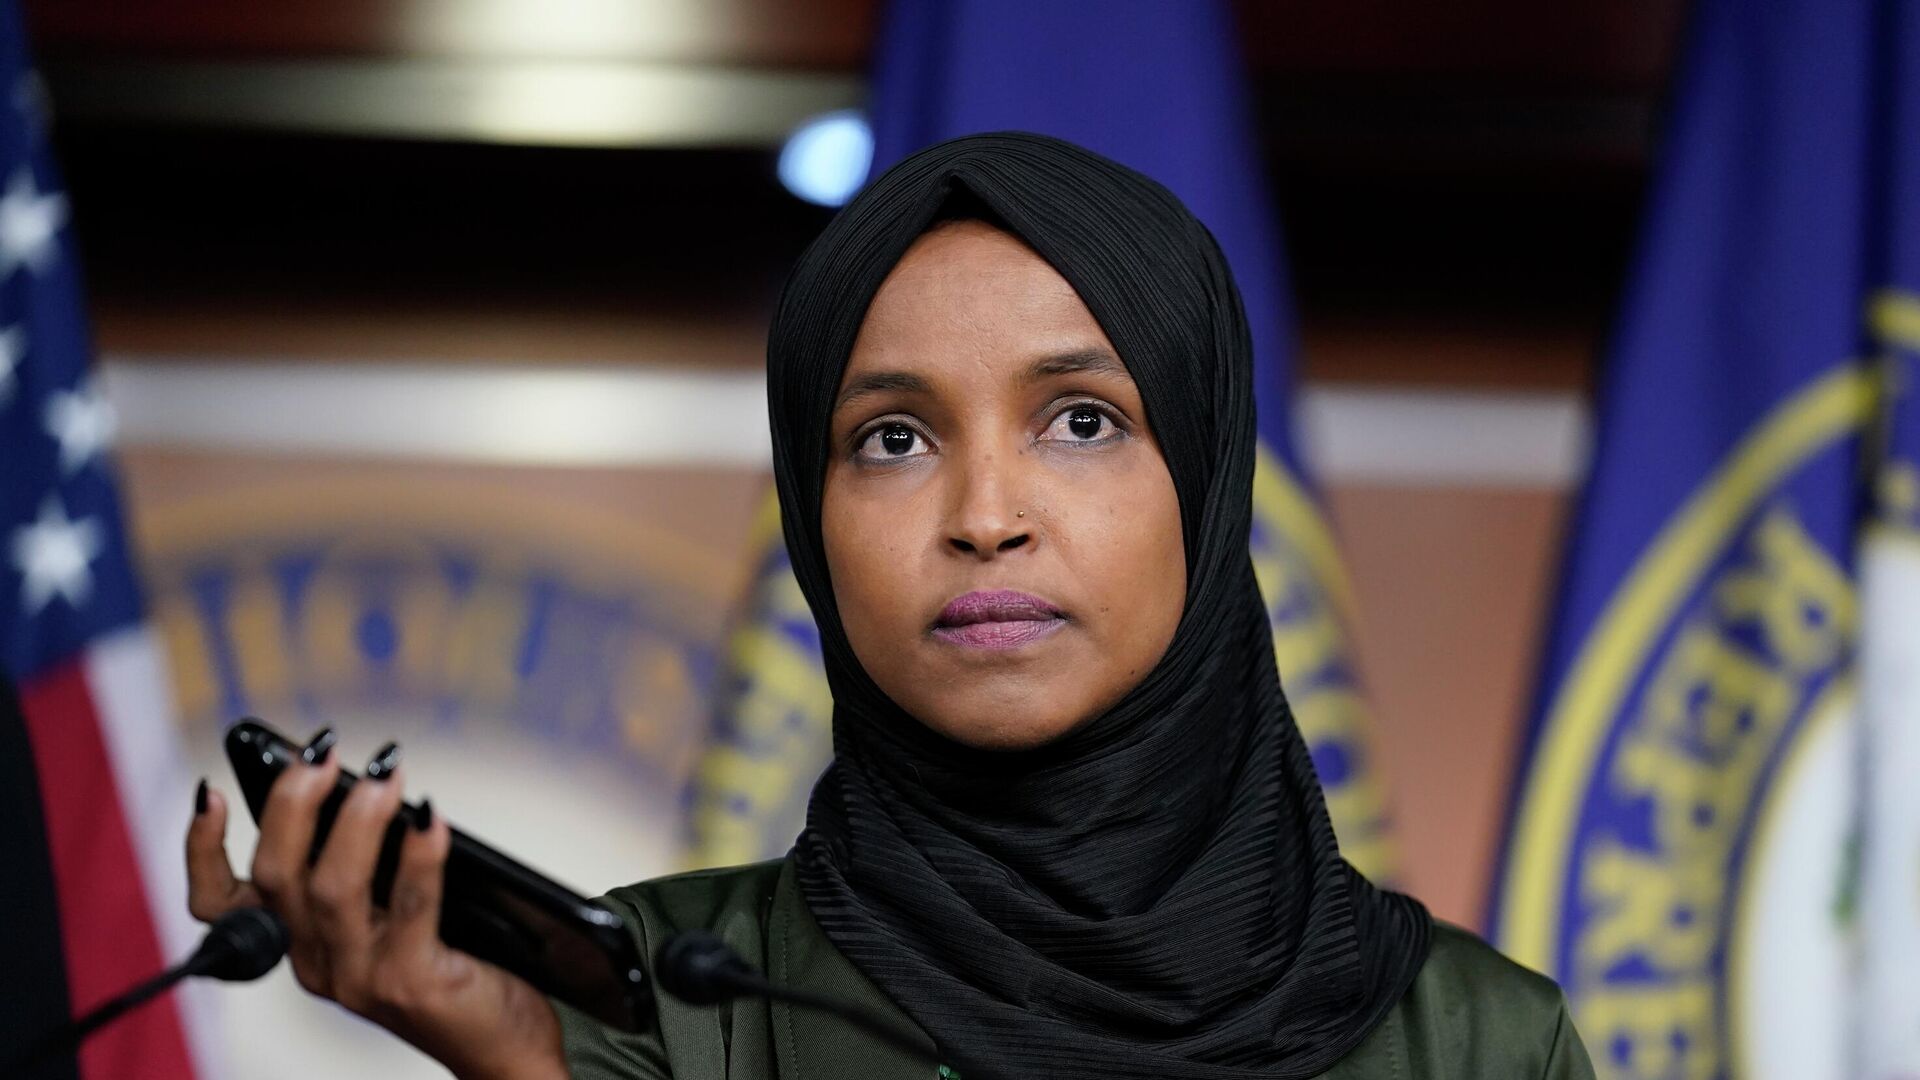 Rep. Ilhan Omar, D-Minn., plays a recording of a death threat left on her voicemail in the wake of anti-Islamic comments made last week by Rep. Lauren Boebert, R-Colo., who likened Omar to a bomb-carrying terrorist, during a news conference at the Capitol in Washington, Tuesday, Nov. 30, 2021 - Sputnik International, 1920, 02.07.2022